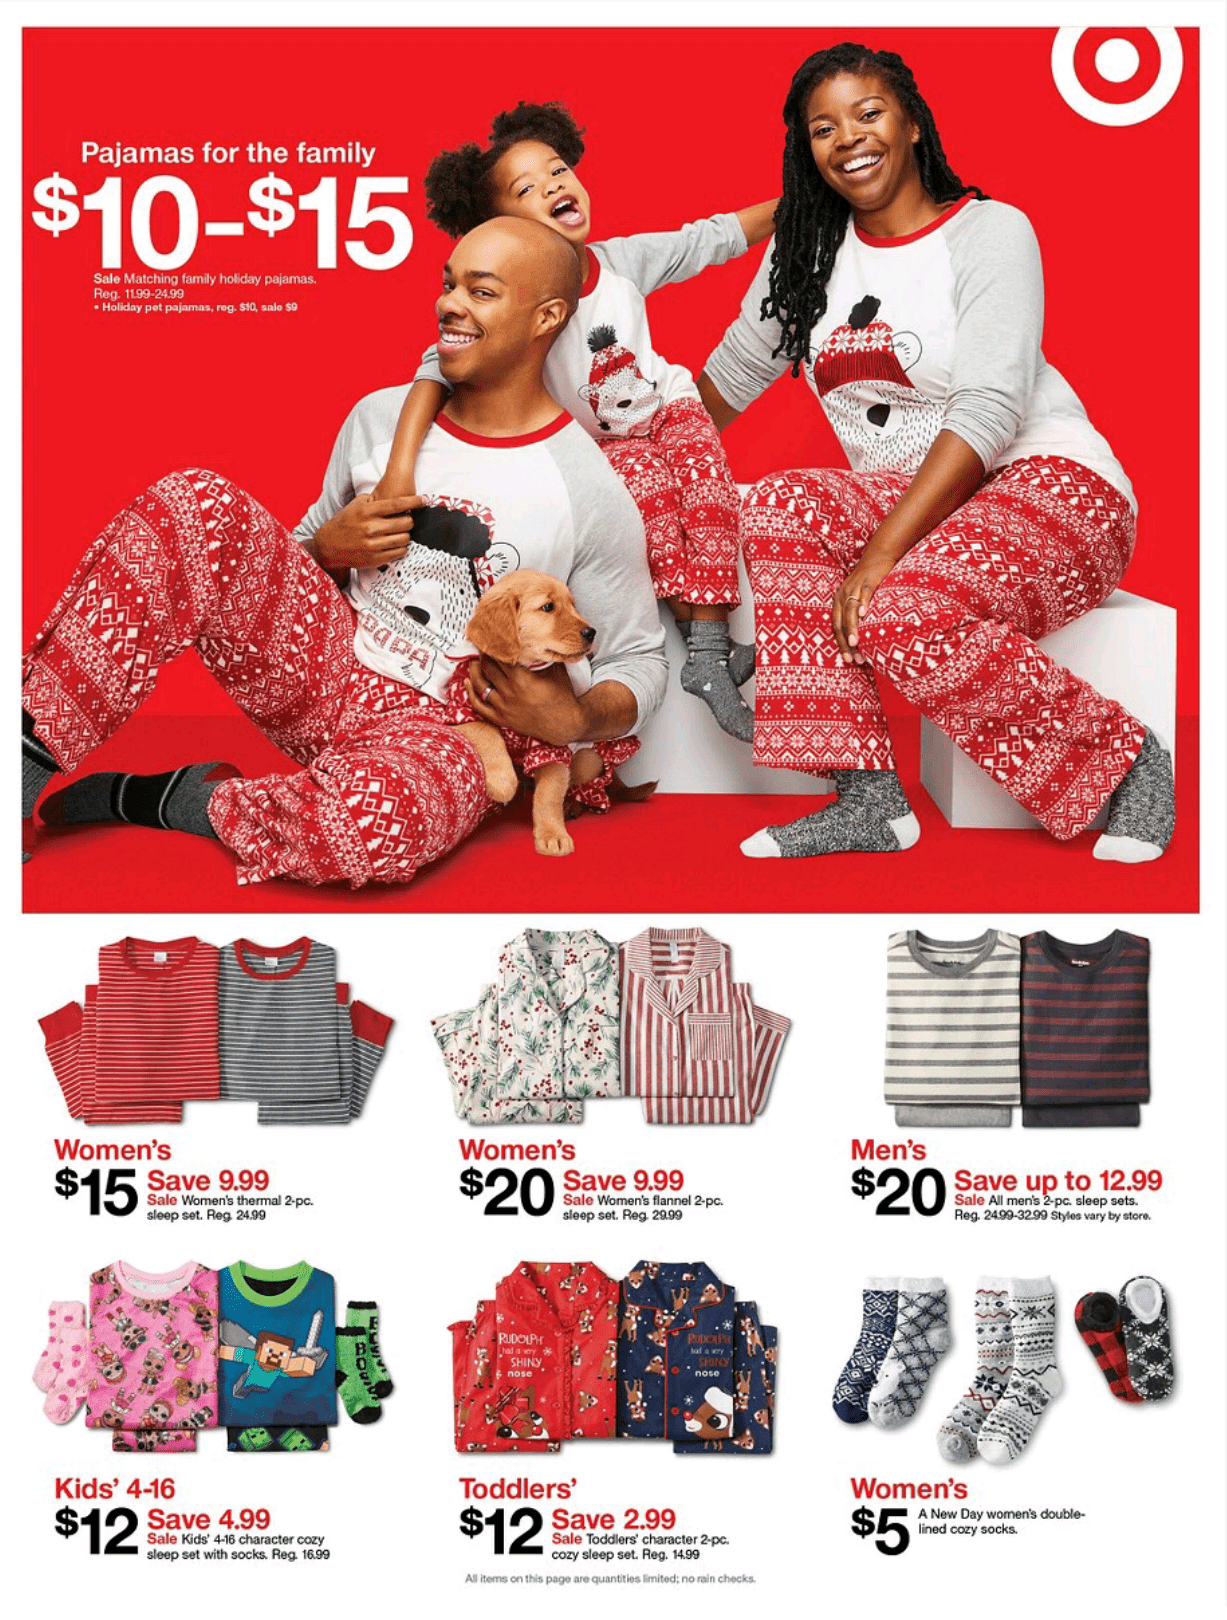 It’s Here! 2019 Target Black Friday Ad Preview - Page 10 of 13 - 0